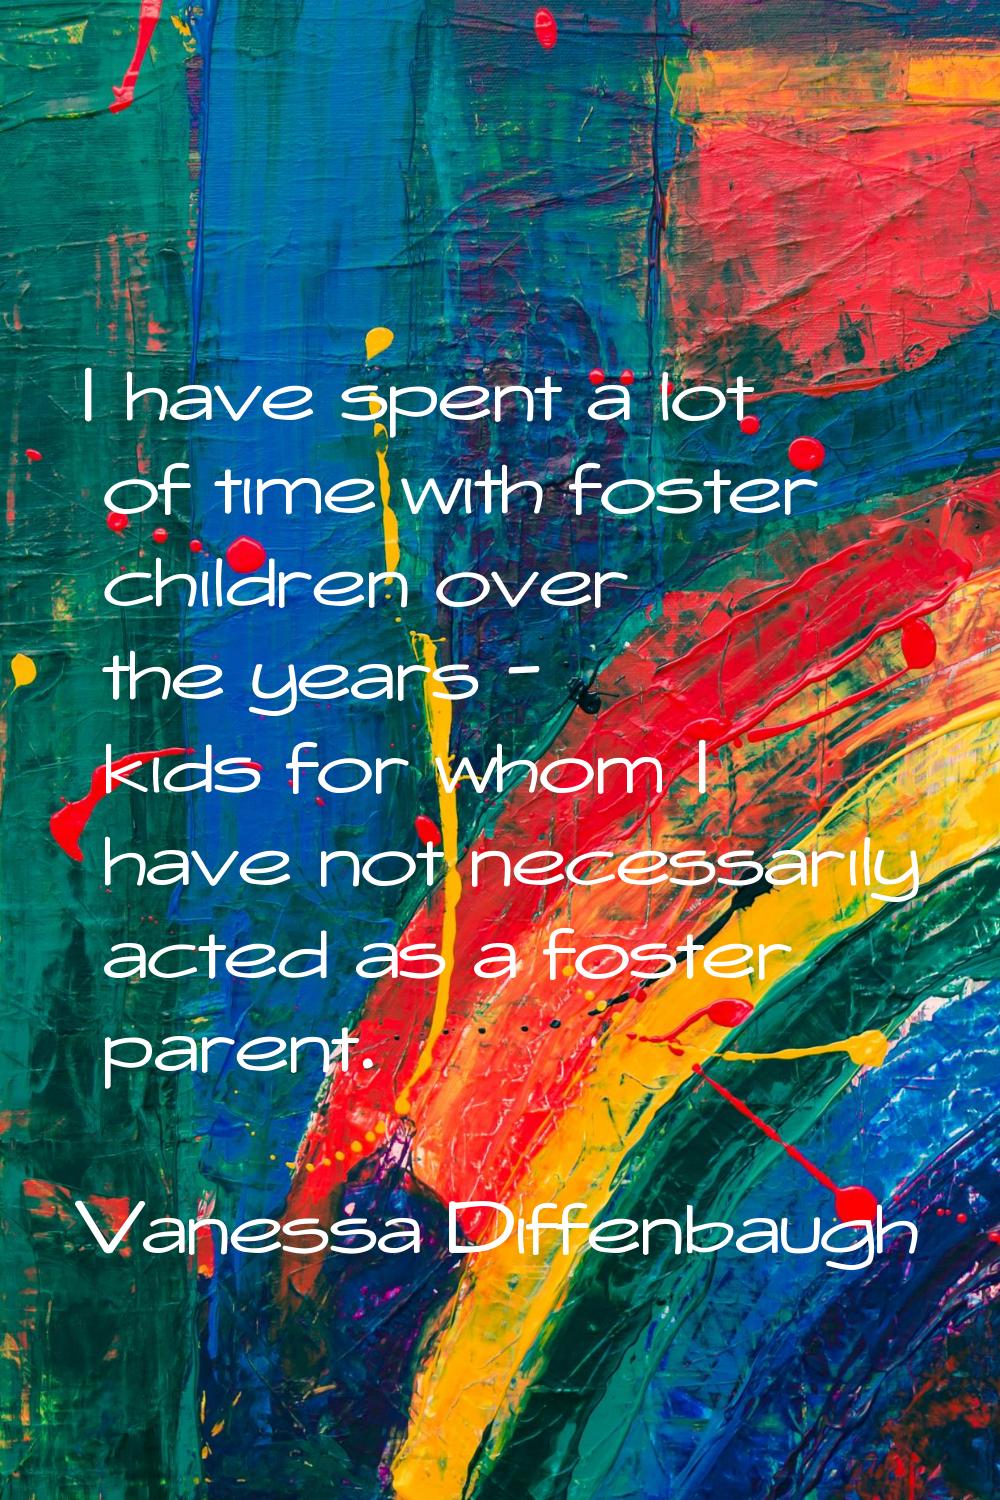 I have spent a lot of time with foster children over the years - kids for whom I have not necessari